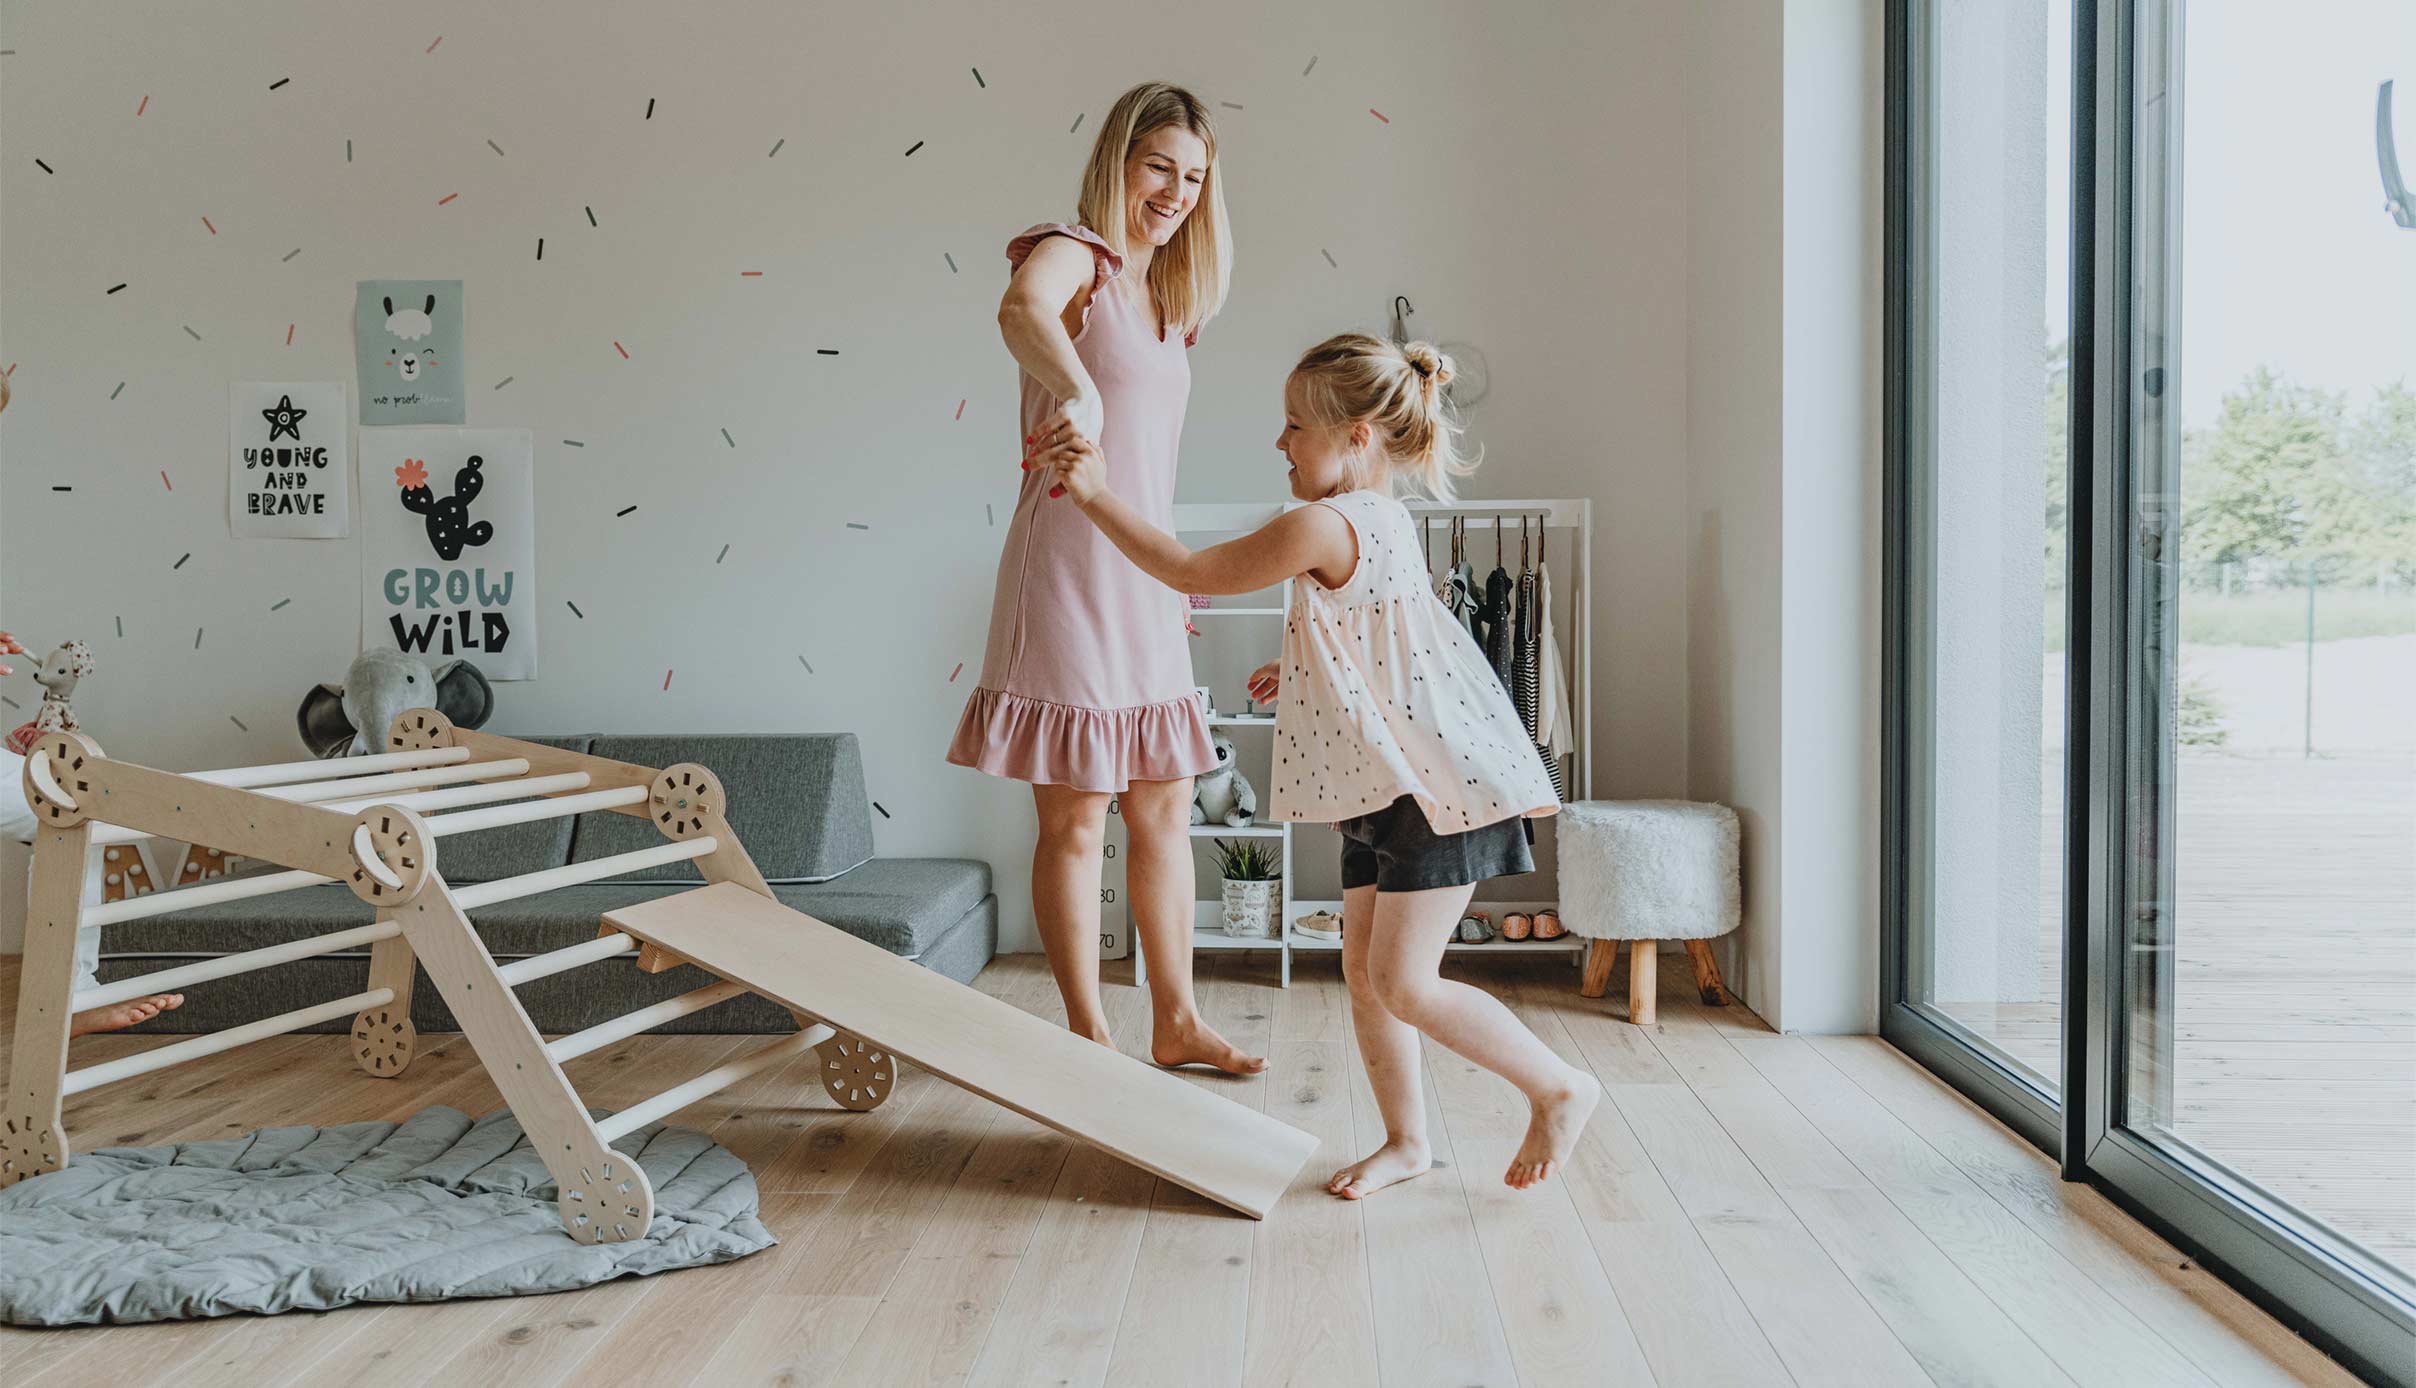 A mother and daughter playing in a room with a wooden play structure.